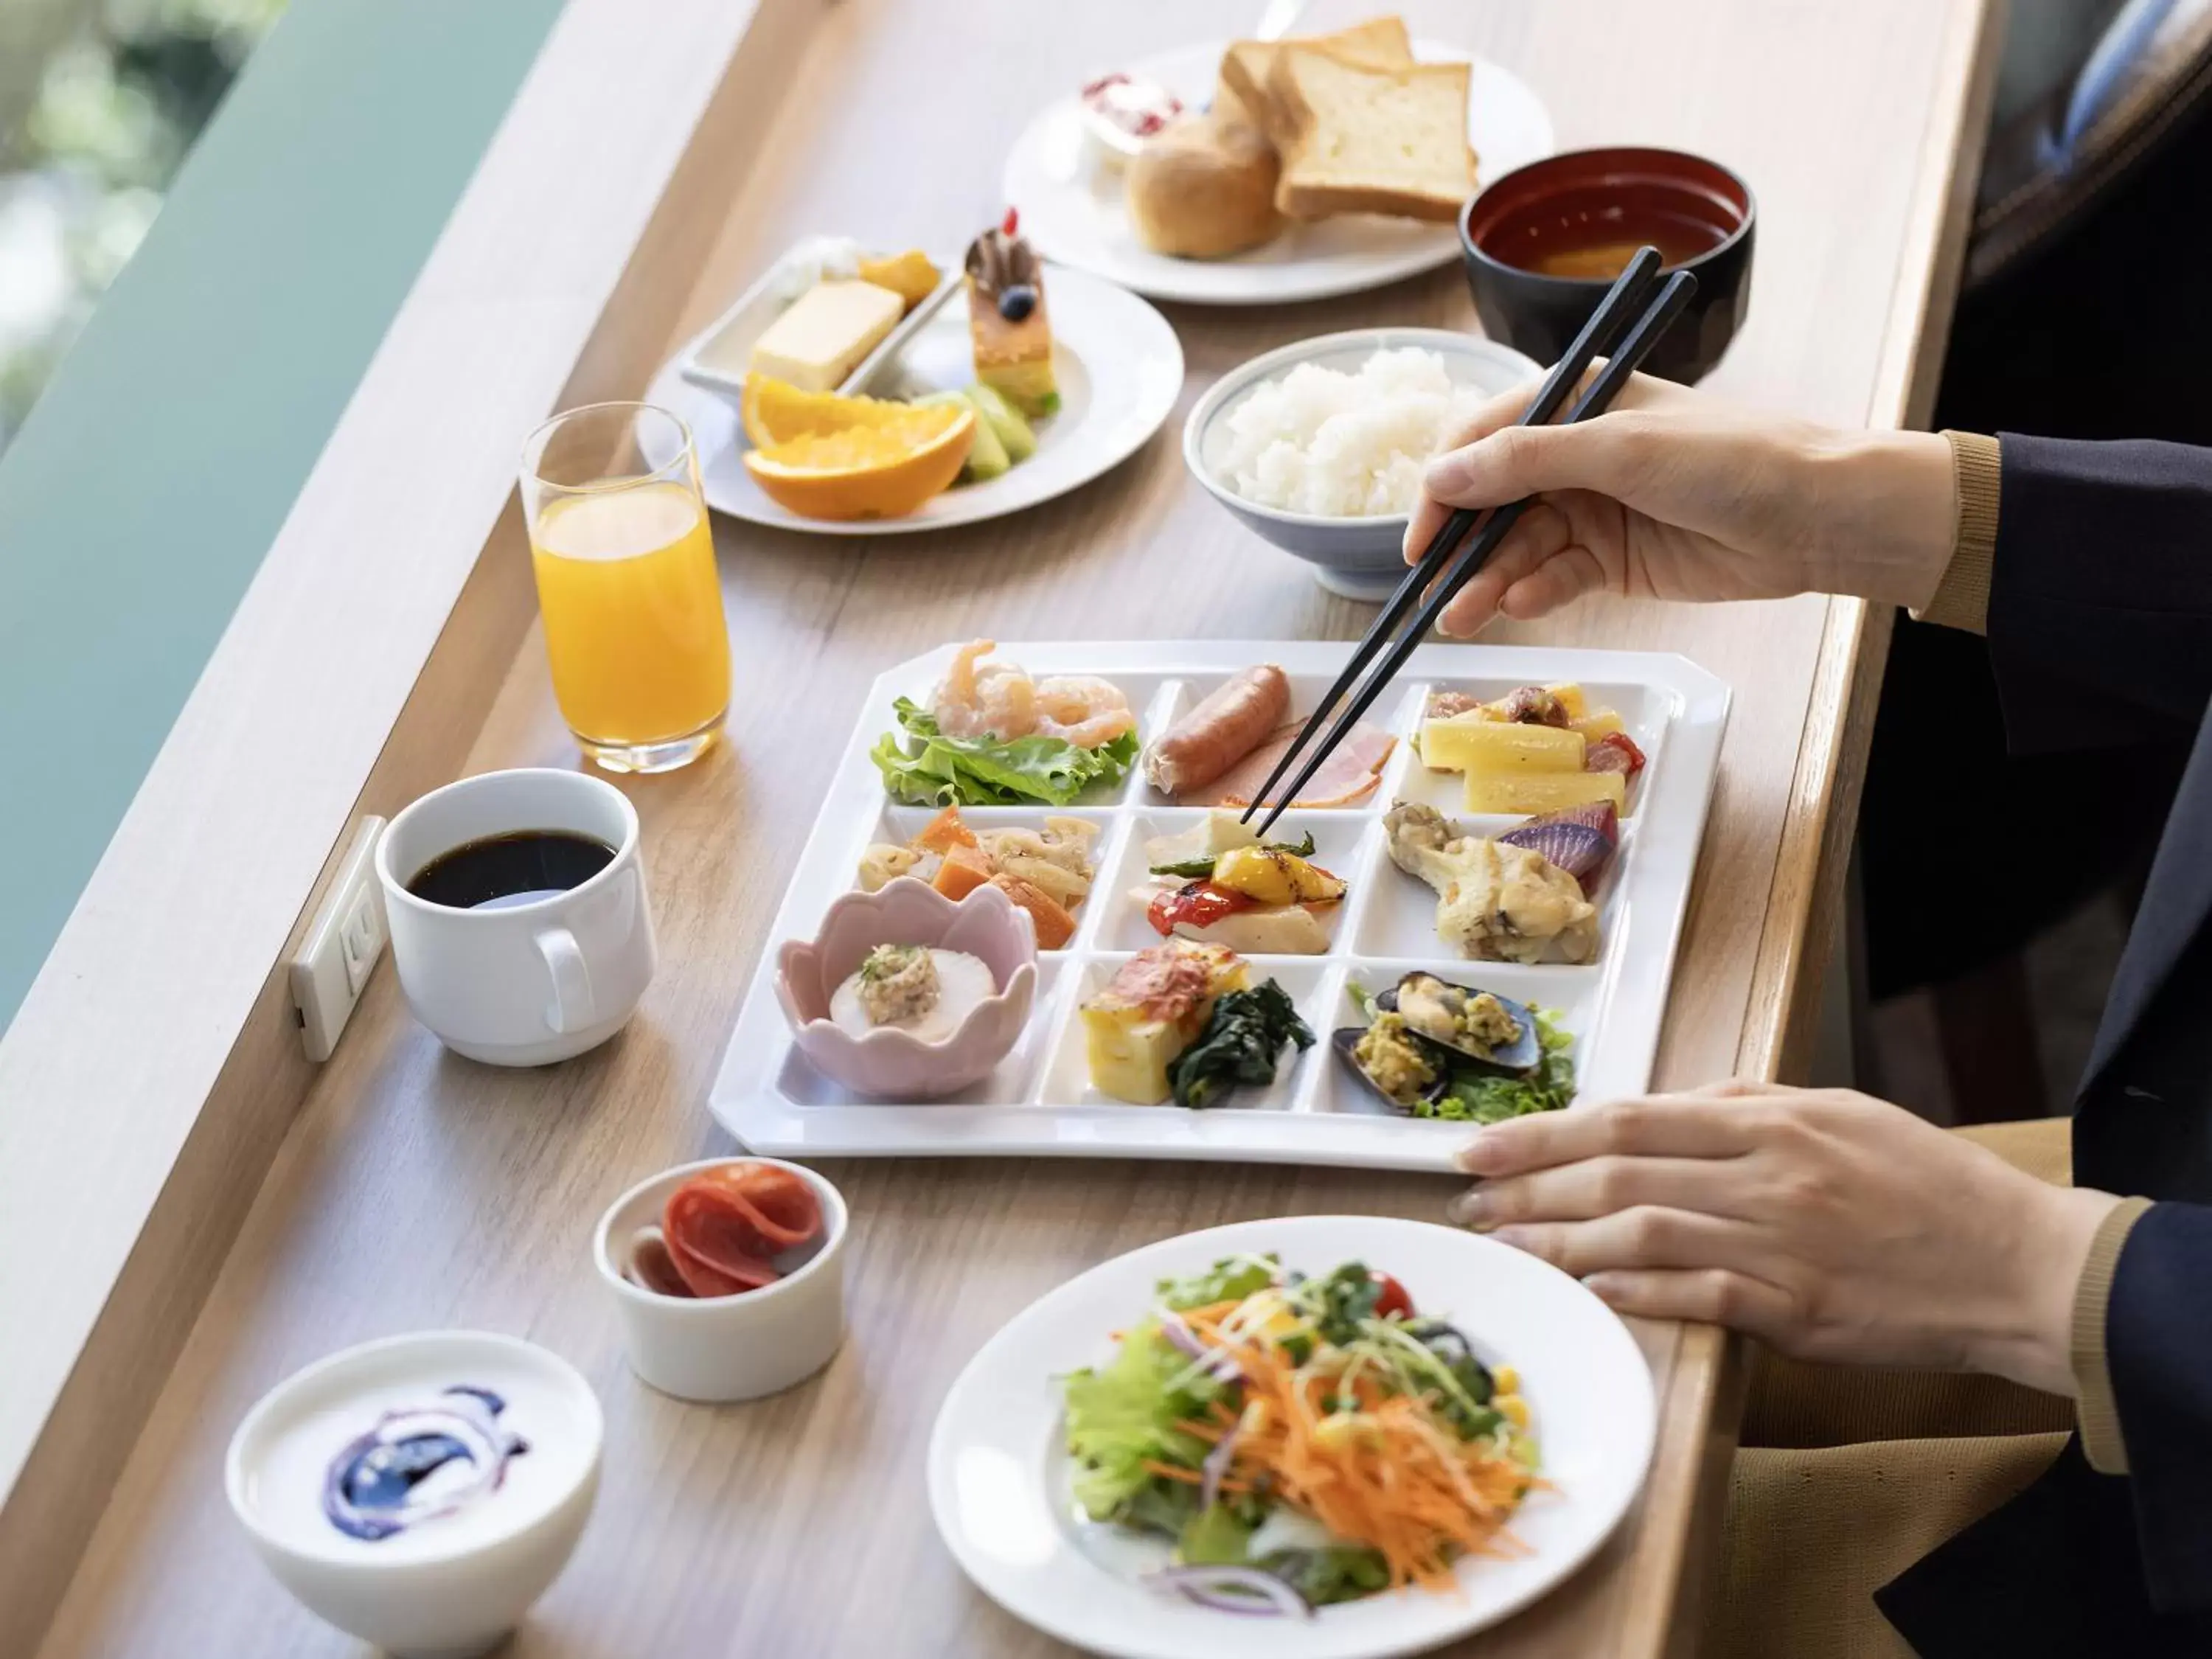 Buffet breakfast, Lunch and Dinner in Hotel Gracery Ginza